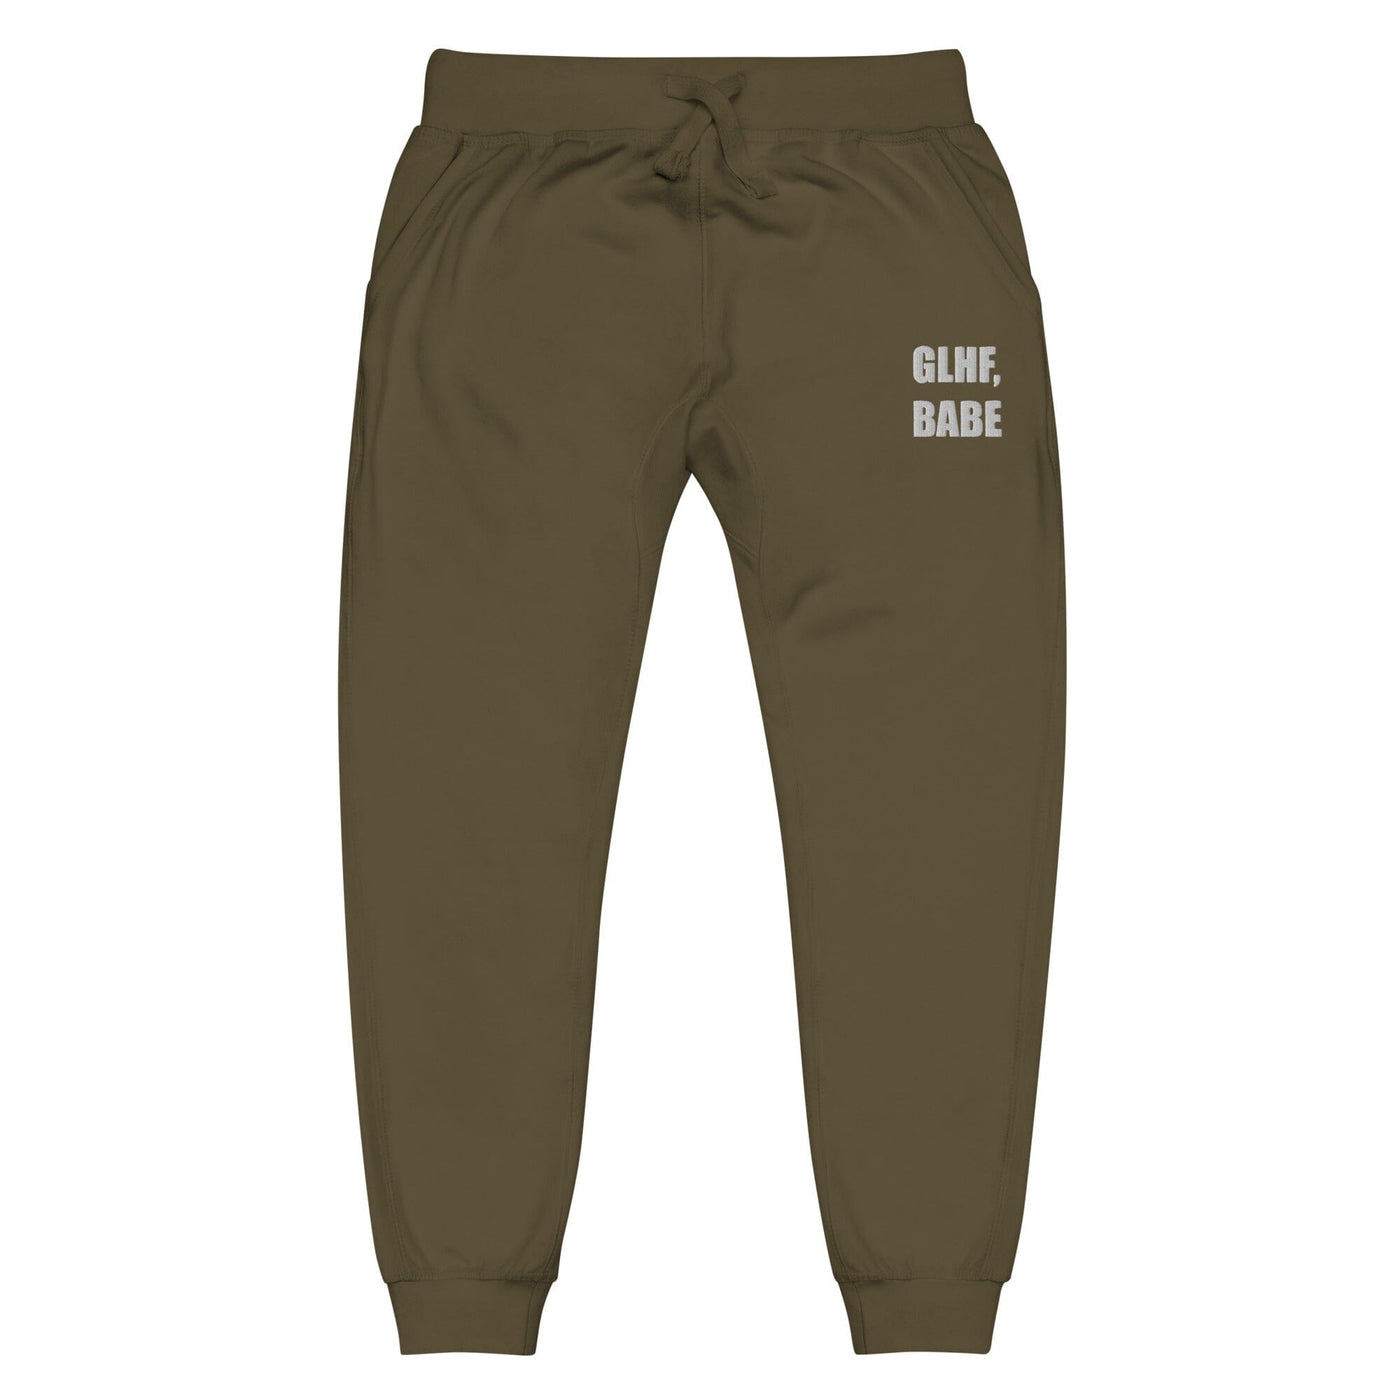 GLHF, Babe | Unisex fleece sweatpants | Gamer Affirmations Threads & Thistles Inventory Military Green XS 